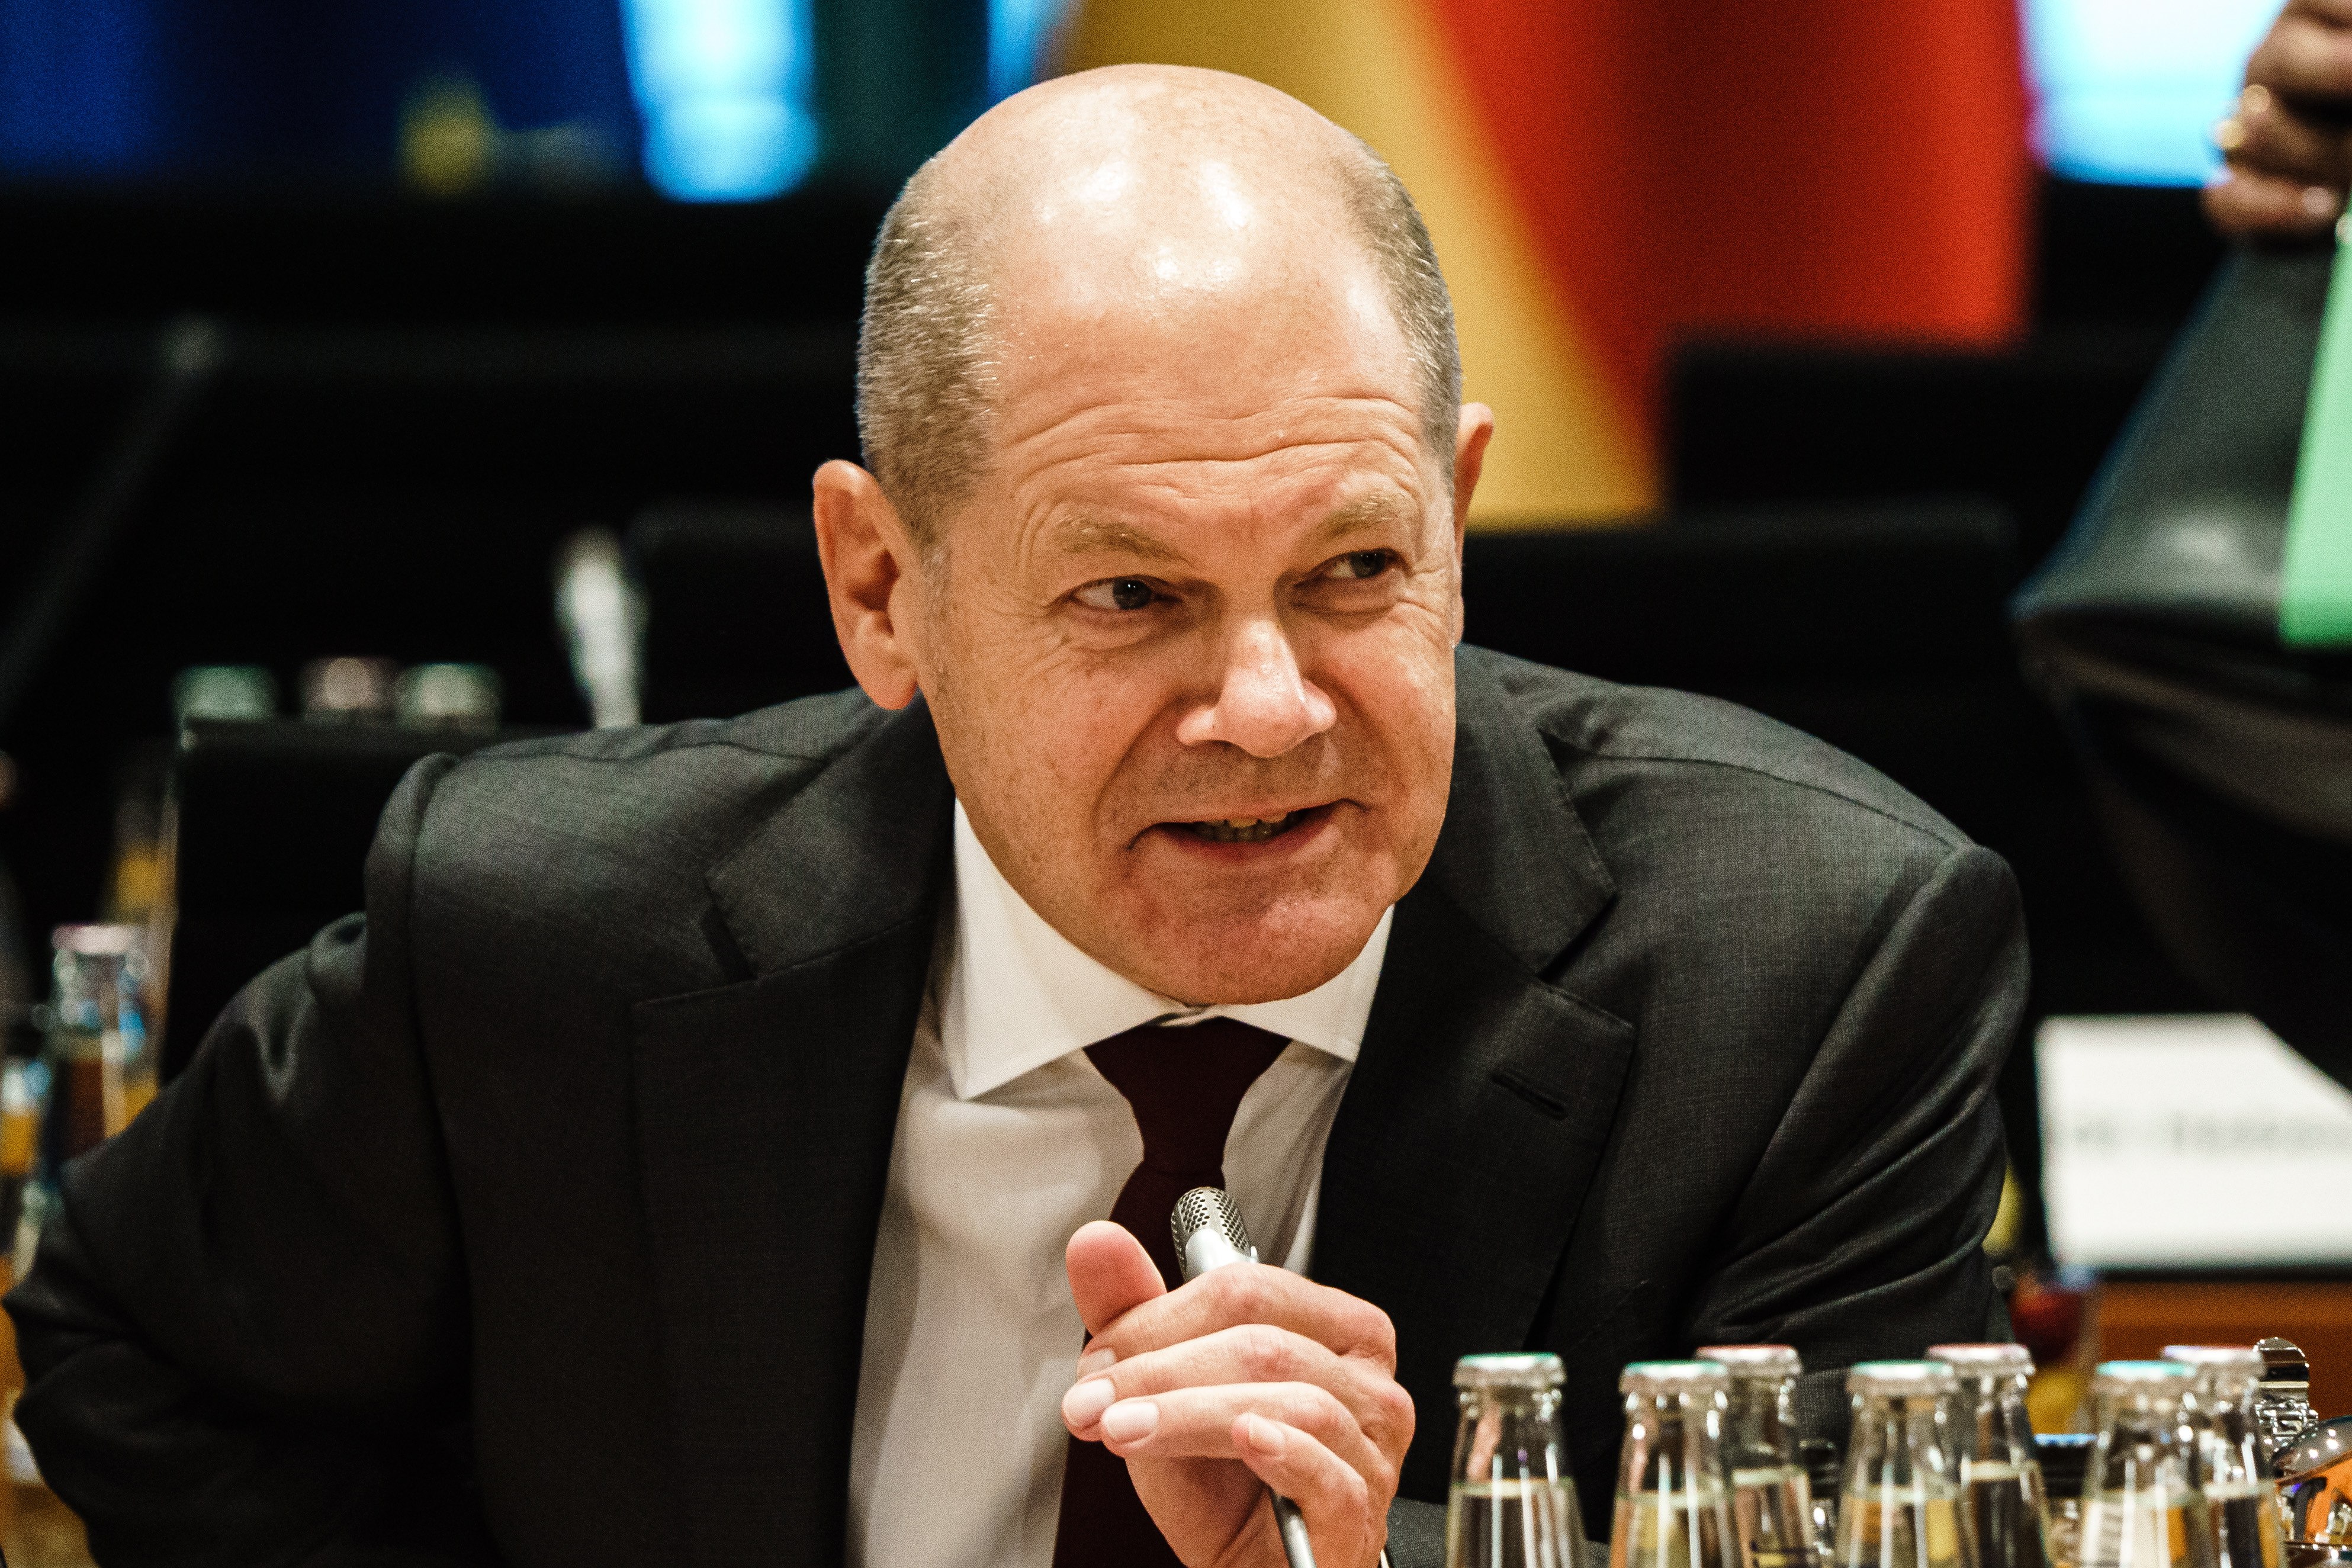 German Chancellor Olaf Scholz will be the first Western European leader to visit Beijing since before the pandemic. Photo: EPA-EFE